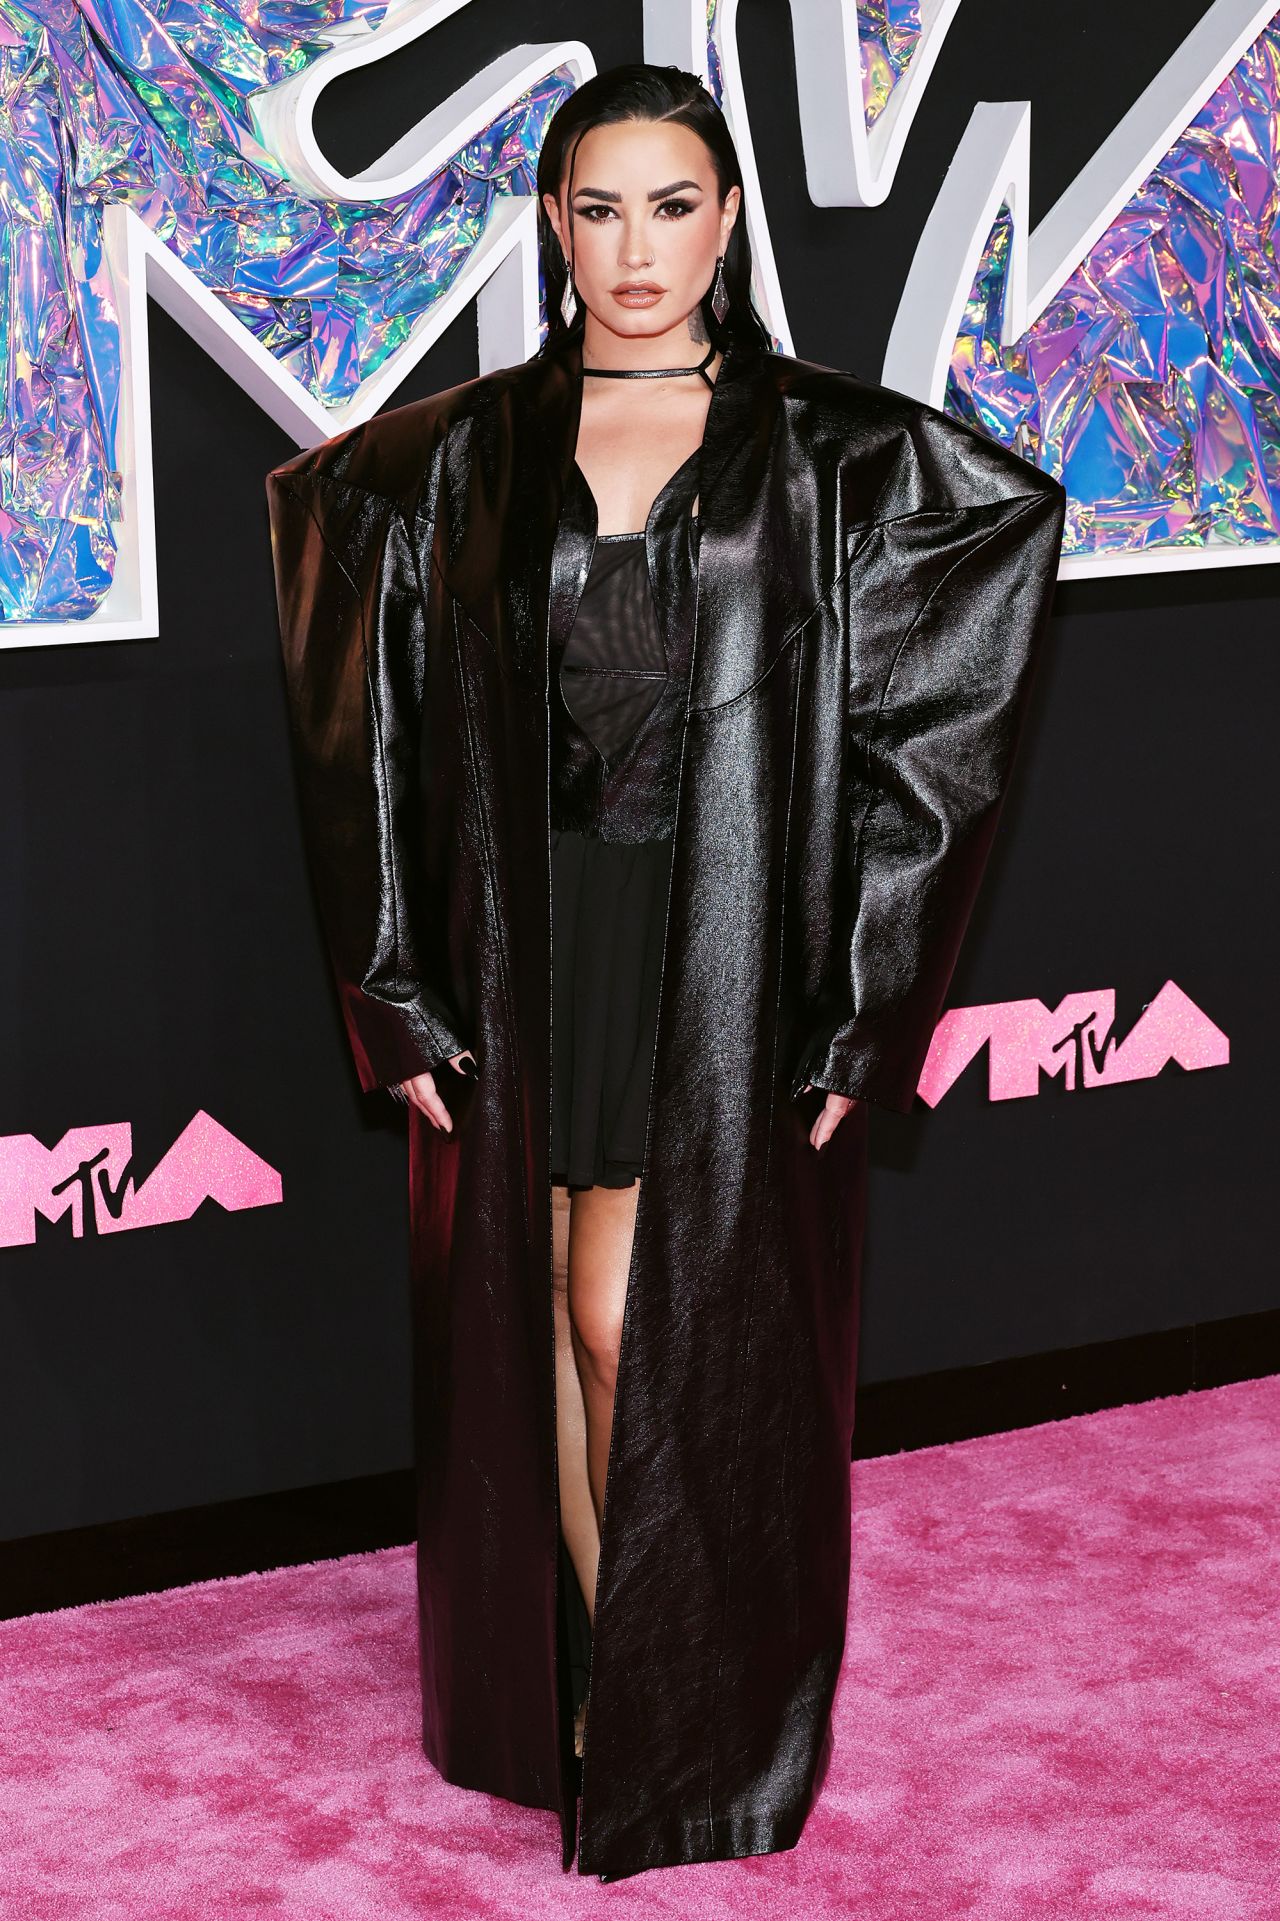 Demi Lovato looked edgy in an oversized geometric black coat layered with a mesh and leather mini dress resembling the one she wore on the cover of her forthcoming album 